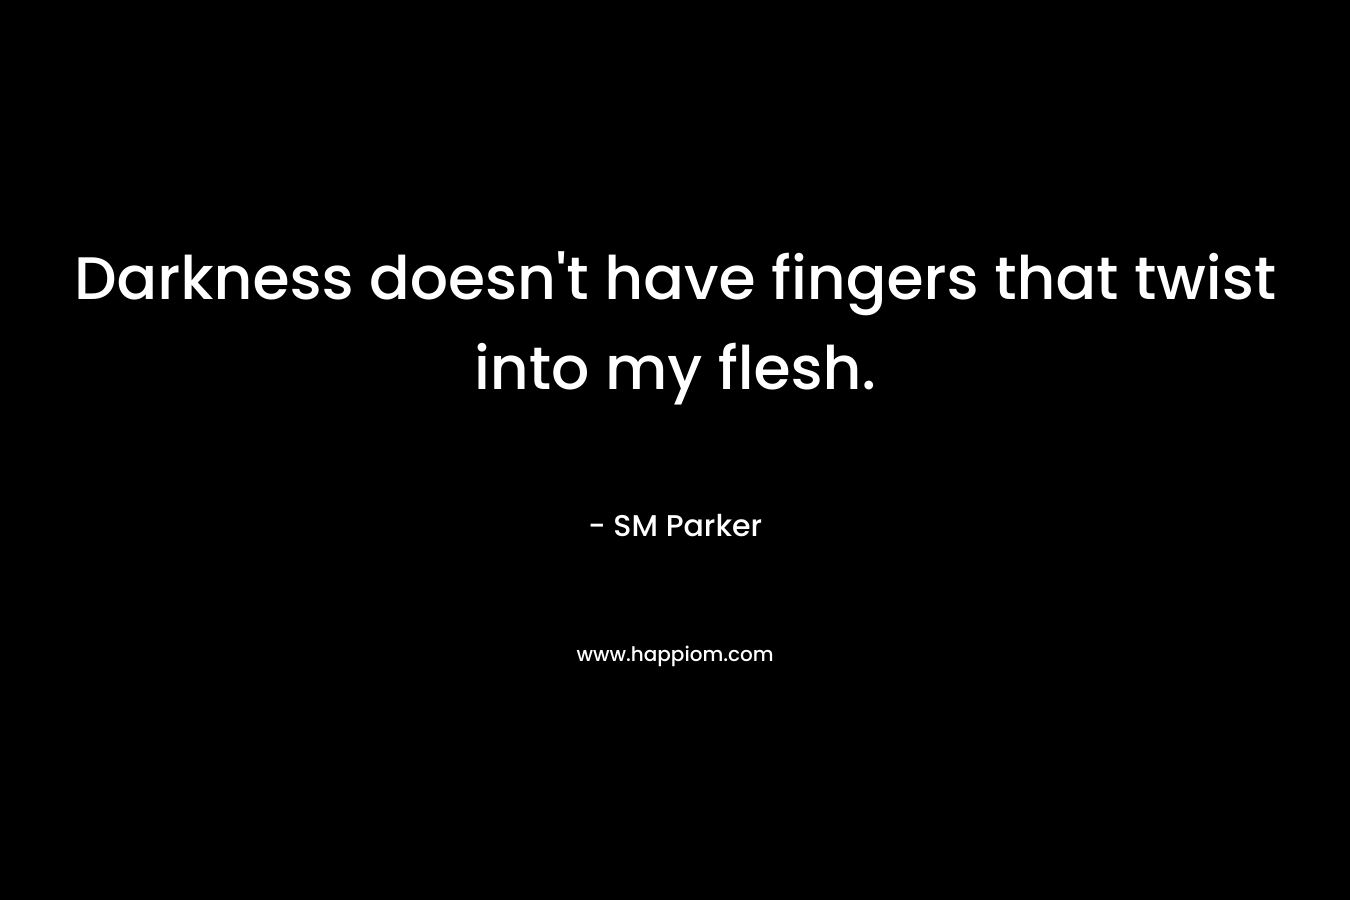 Darkness doesn’t have fingers that twist into my flesh. – SM Parker